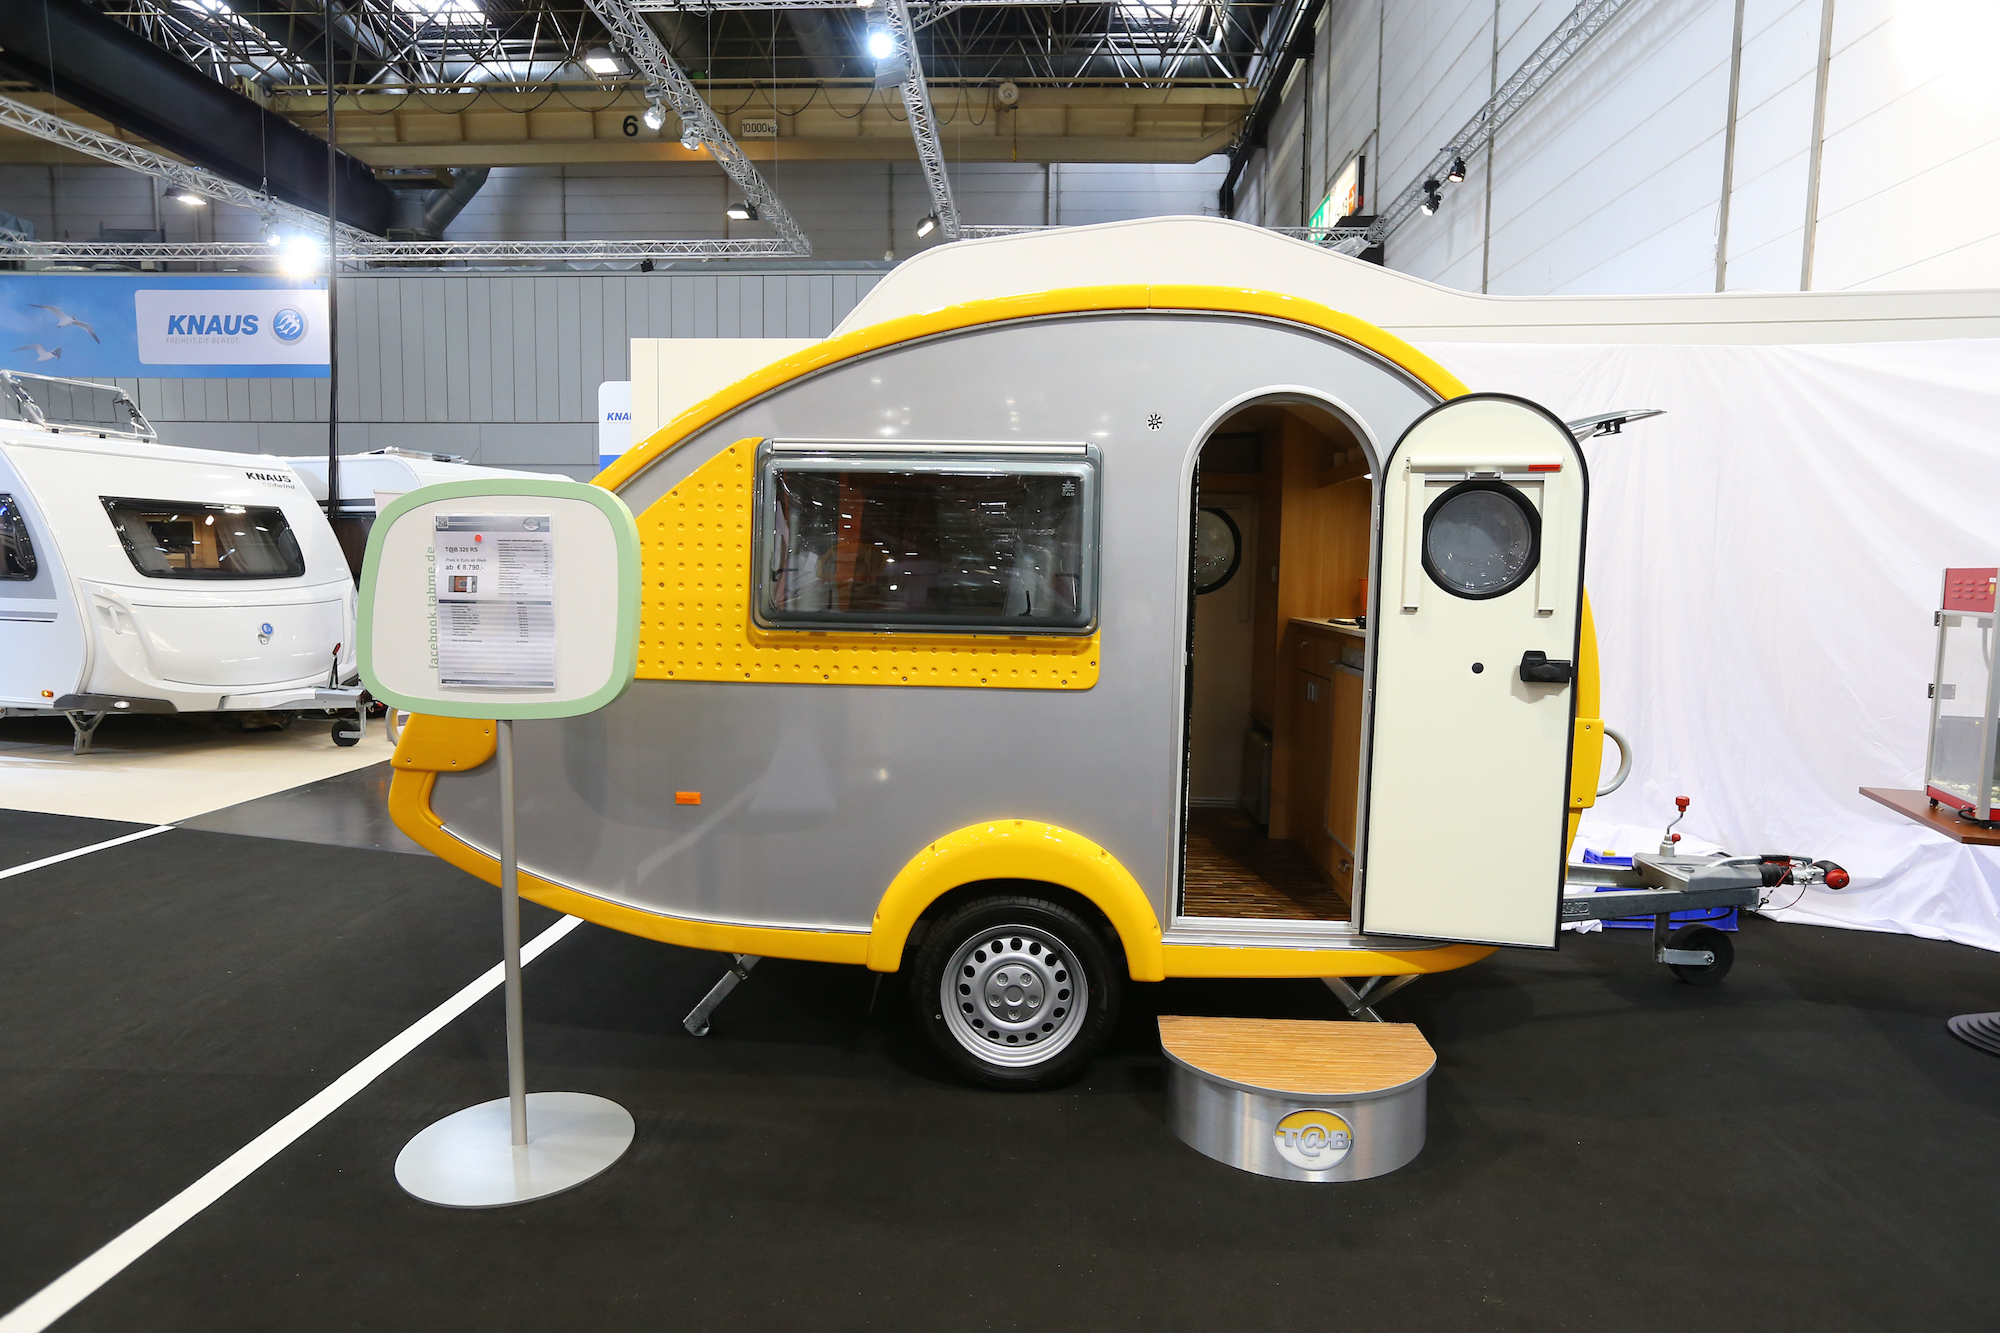 A silver-and-yellow teardrop camper at the Caravan Salon Duesseldorf expo at the fairgrounds on September 4, 2014, in Duesseldorf, Germany.